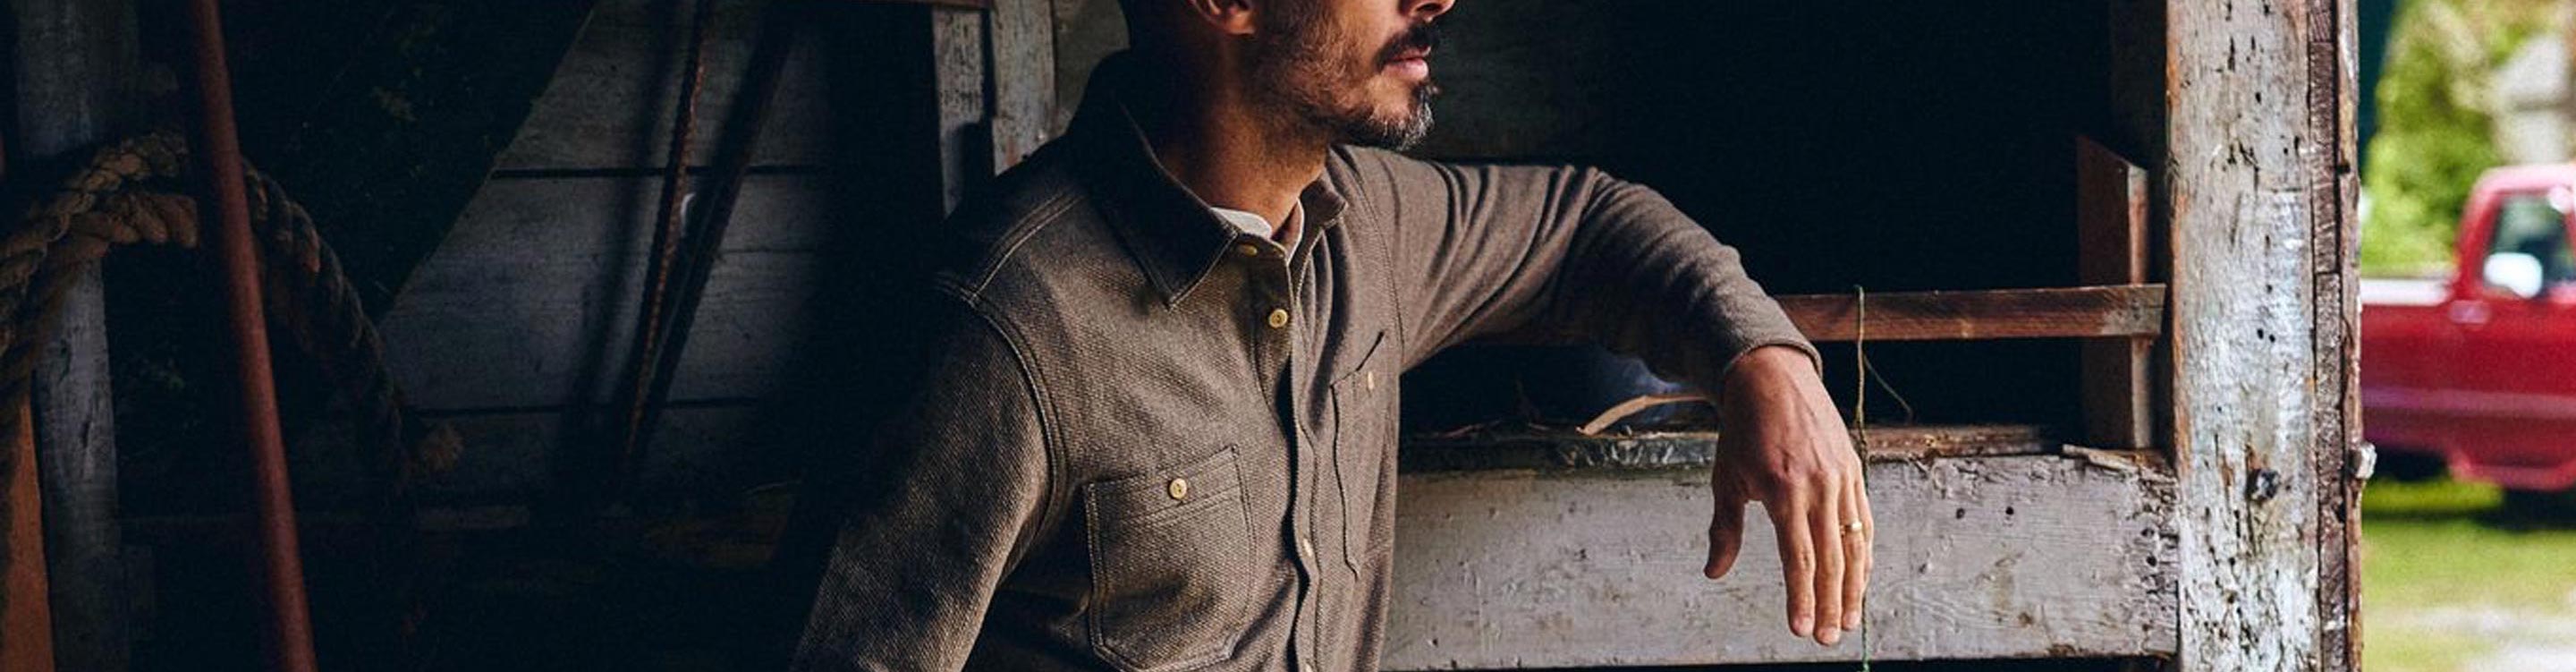 The Utility Shirt in Twill Knit - Knit Shirts for Men | Taylor Stitch